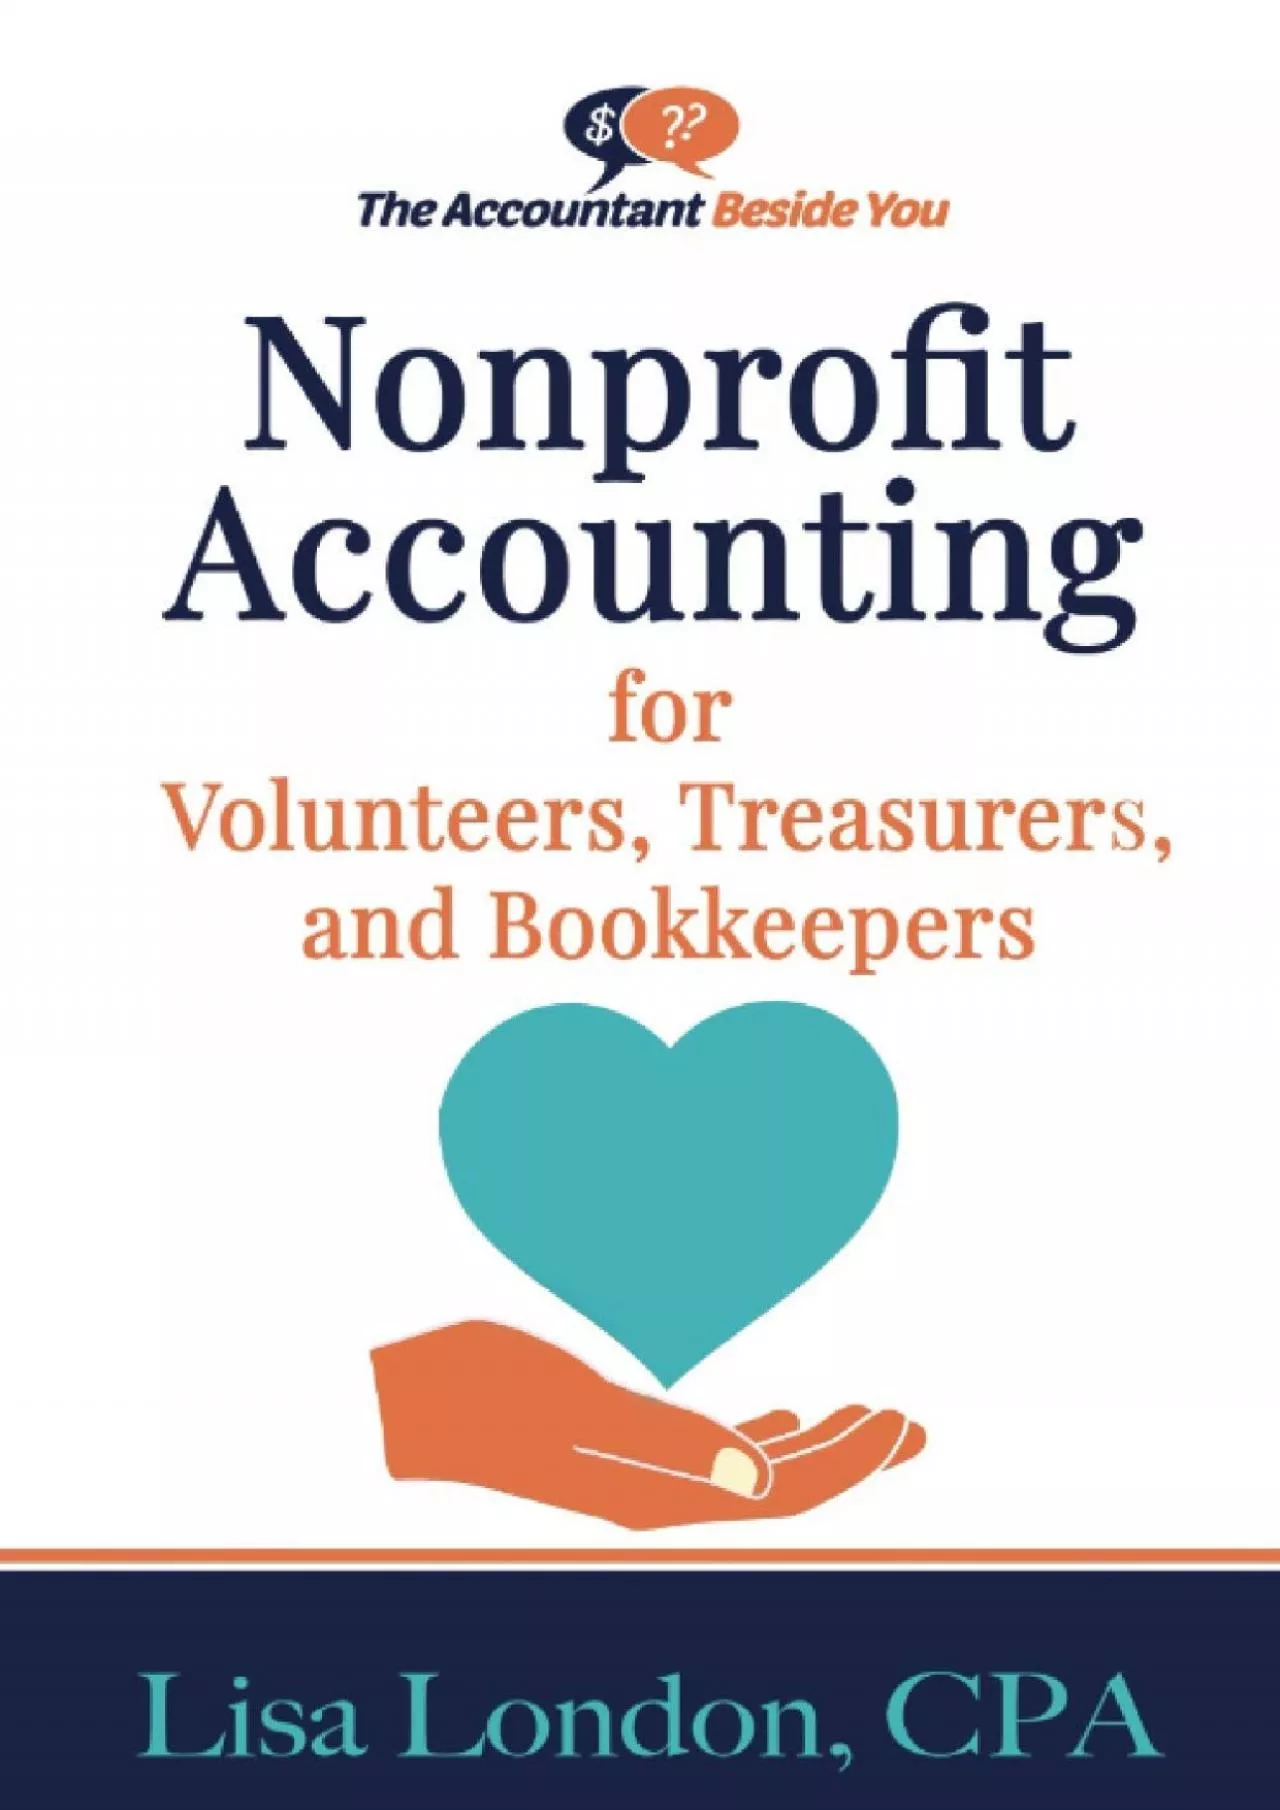 (EBOOK)-Nonprofit Accounting for Volunteers, Treasurers, and Bookkeepers (Accountant Beside